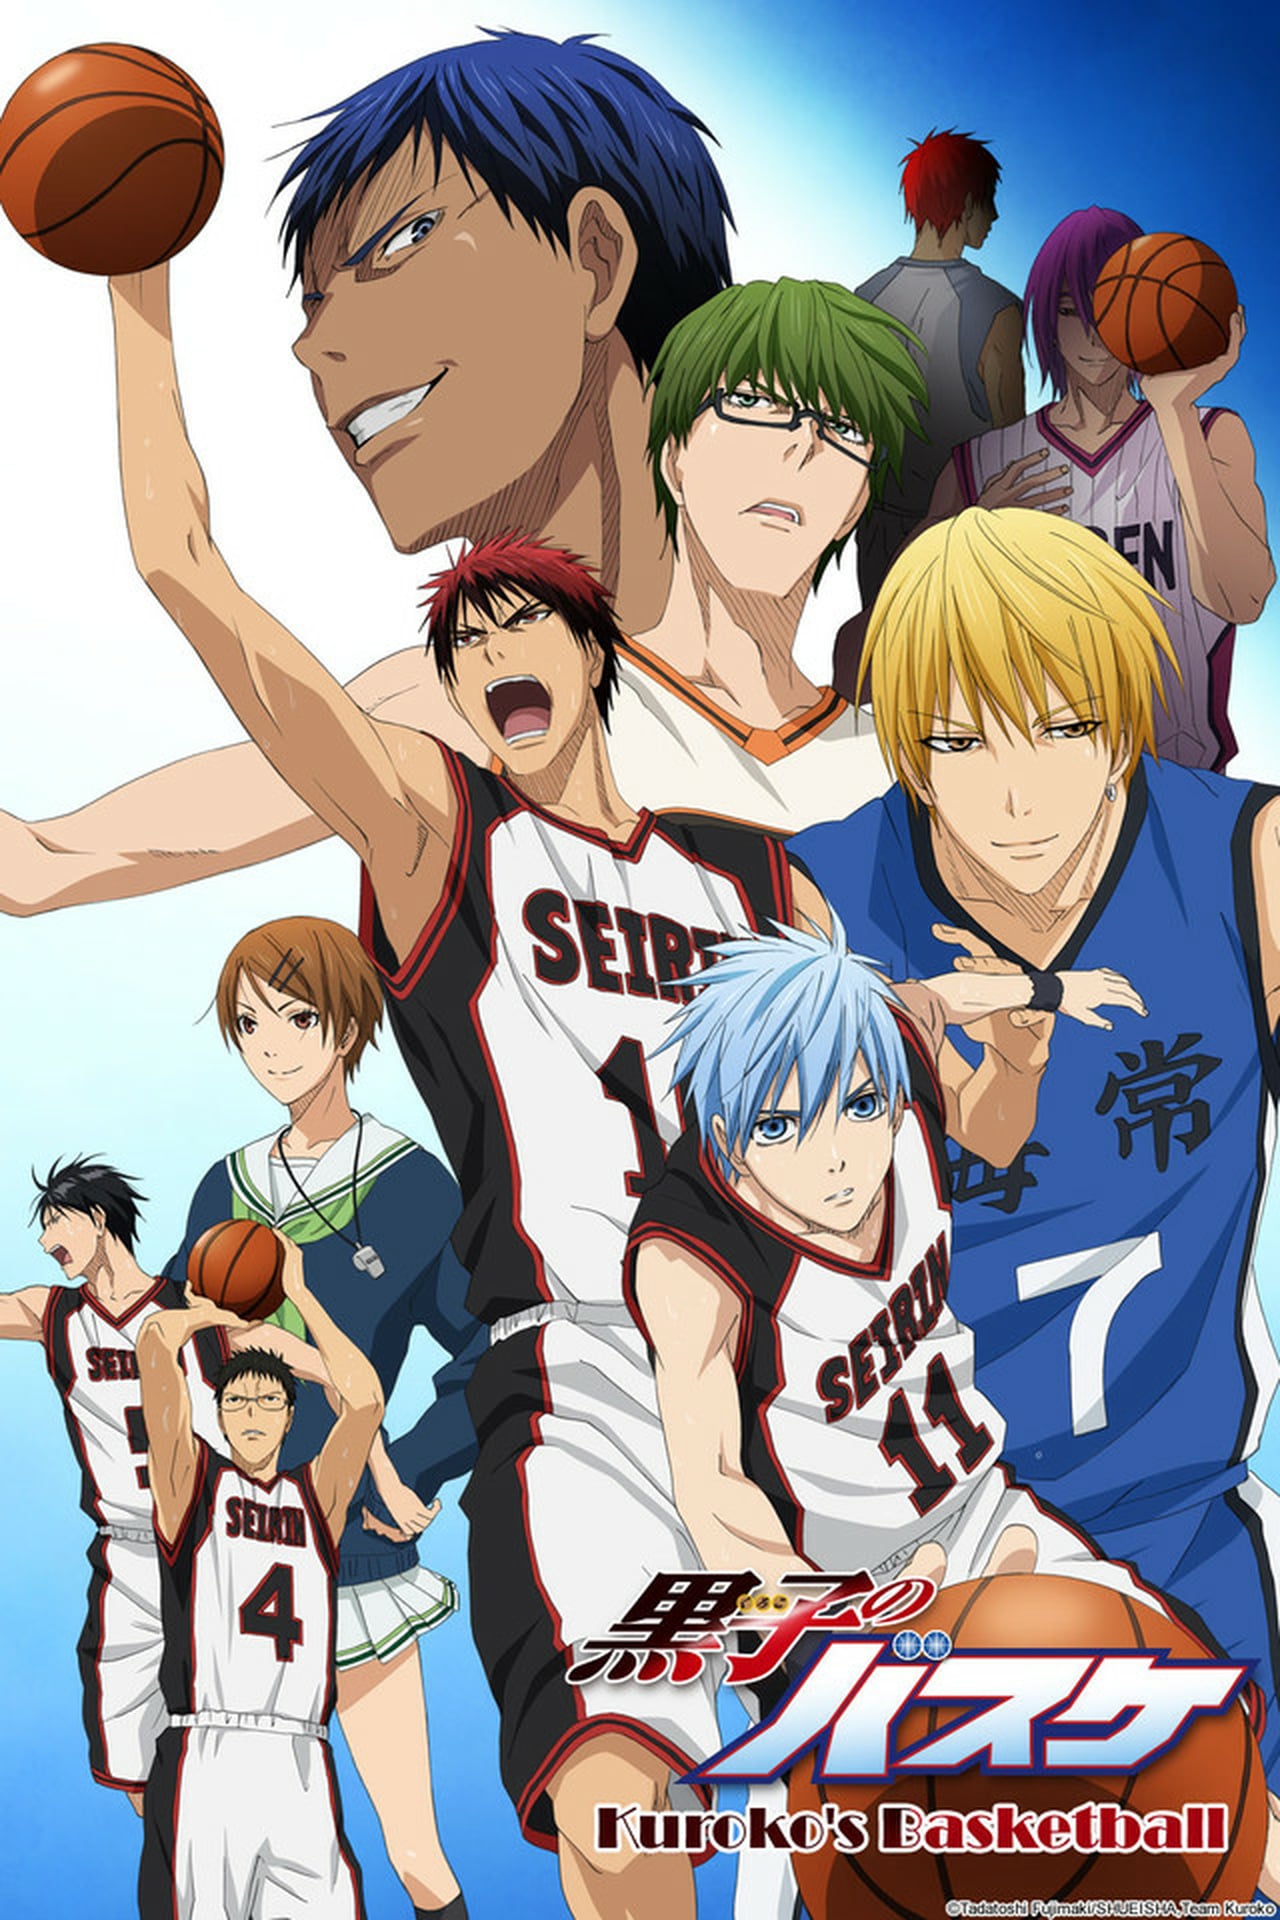 Which real life NBA players do the characters from the anime 'Kuroko's  basketball' mostly resemble? Why do you think so? - Quora